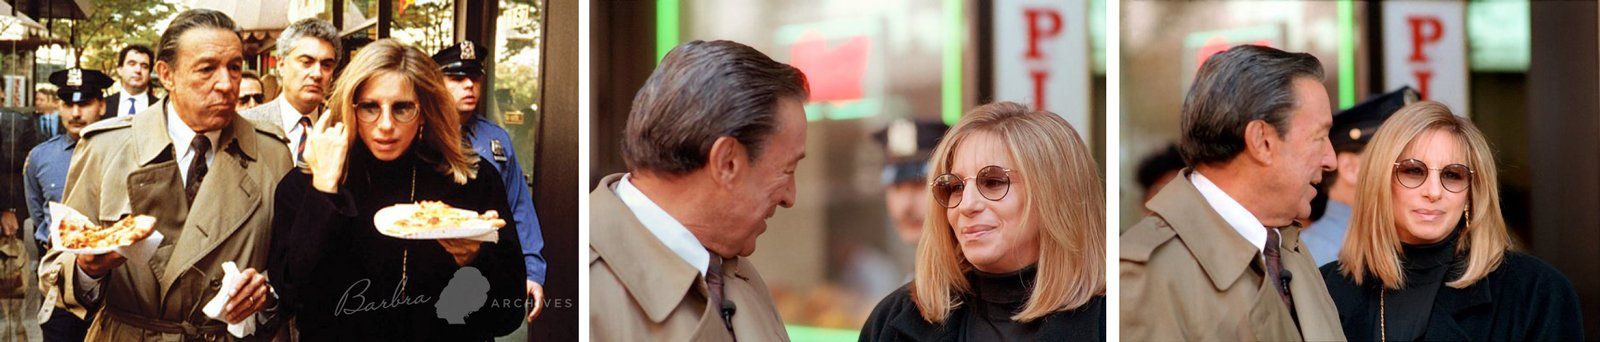 Photos of Barbra Streisand and Mike Wallace on the streets of New York, in Streisand's old neighborhood.